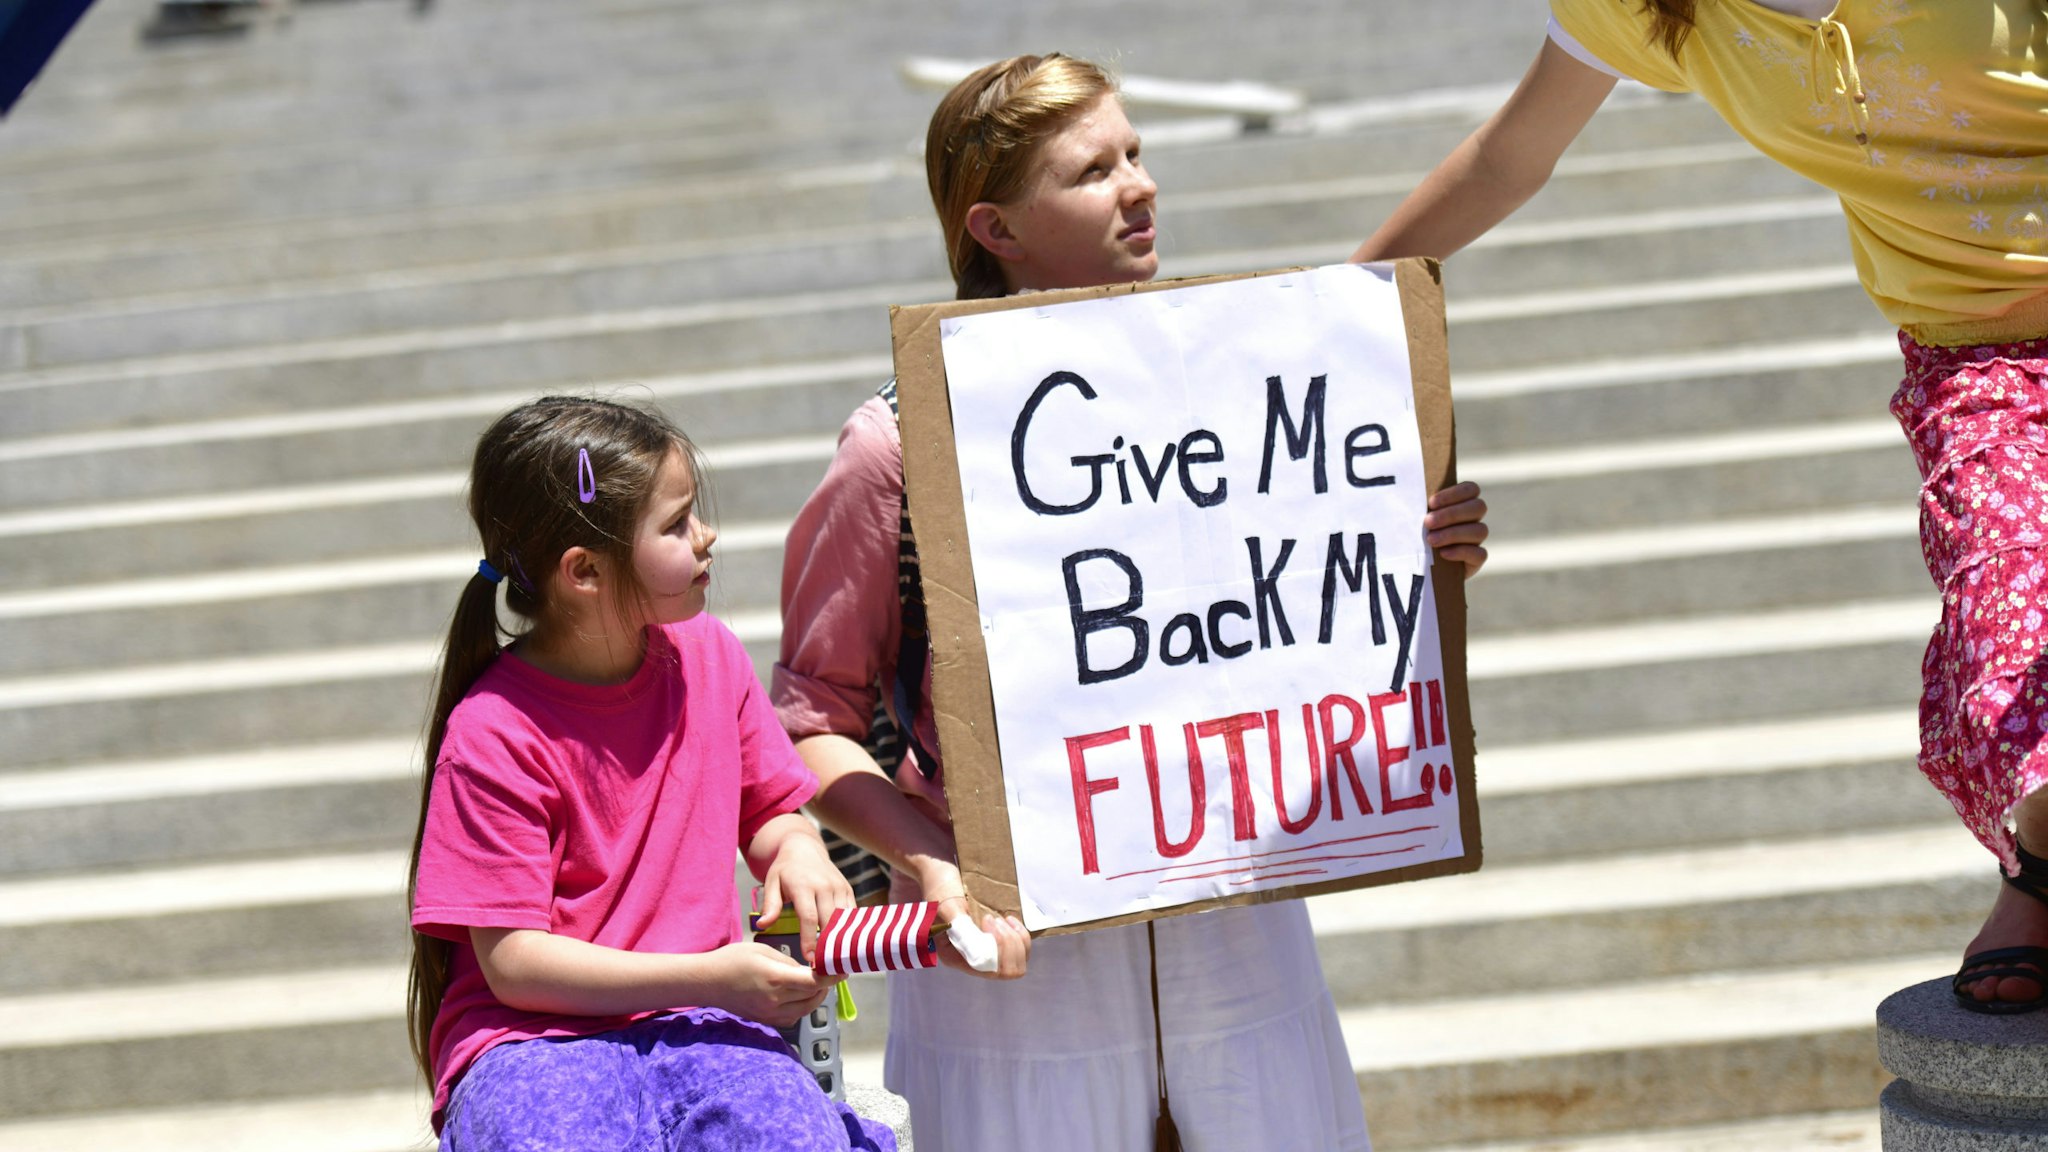 HARRISBURG, PA - MAY 15: A girl holds a placard stating "Give Me Back My Future" during a rally outside the Pennsylvania Capitol Building concerning the continued closure of businesses due to the coronavirus pandemic on May 15, 2020 in Harrisburg, Pennsylvania. Pennsylvania Governor Tom Wolf has introduced a color tiered strategy to reopen the state with most areas not easing restrictions until June 4.